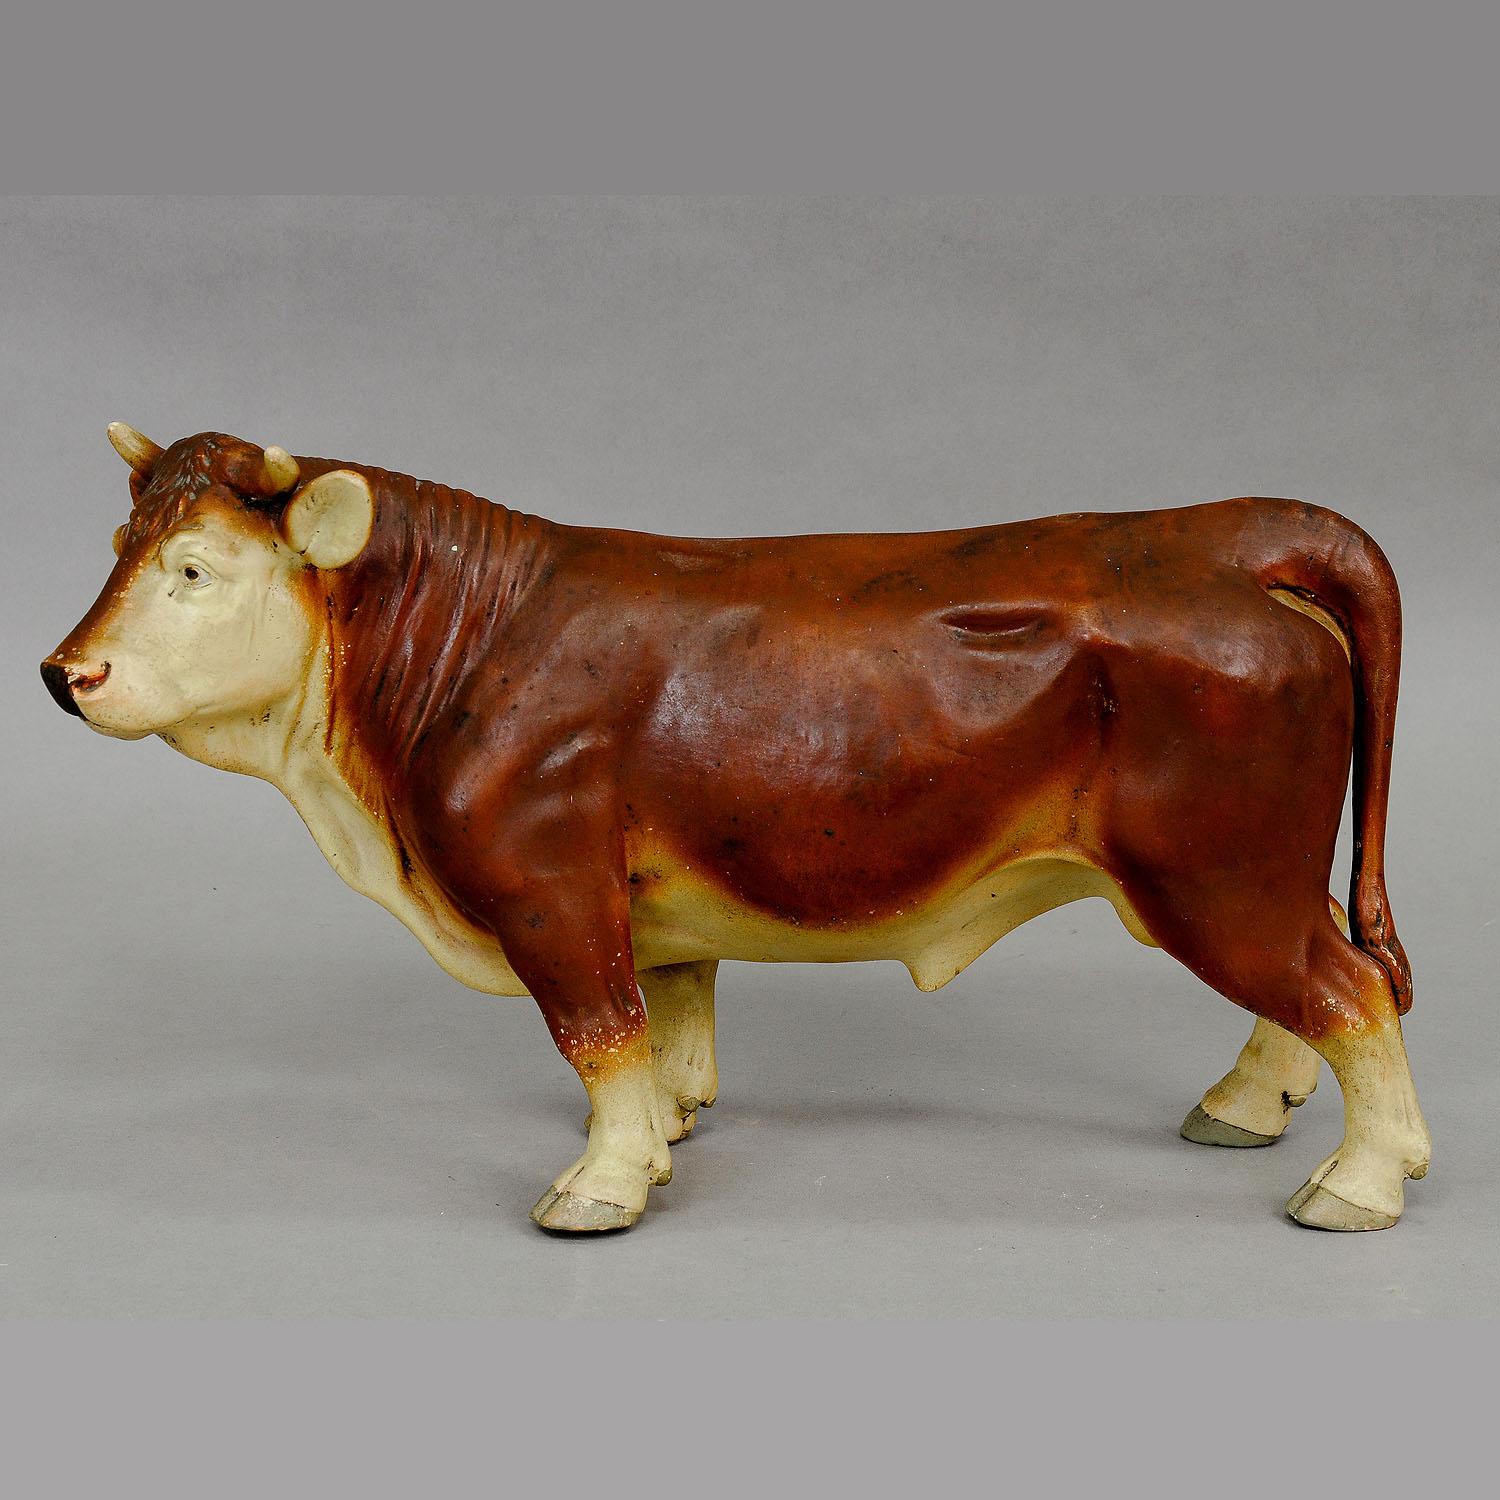 Rustic Antique Butchery Decoration of a Pottery Ox For Sale